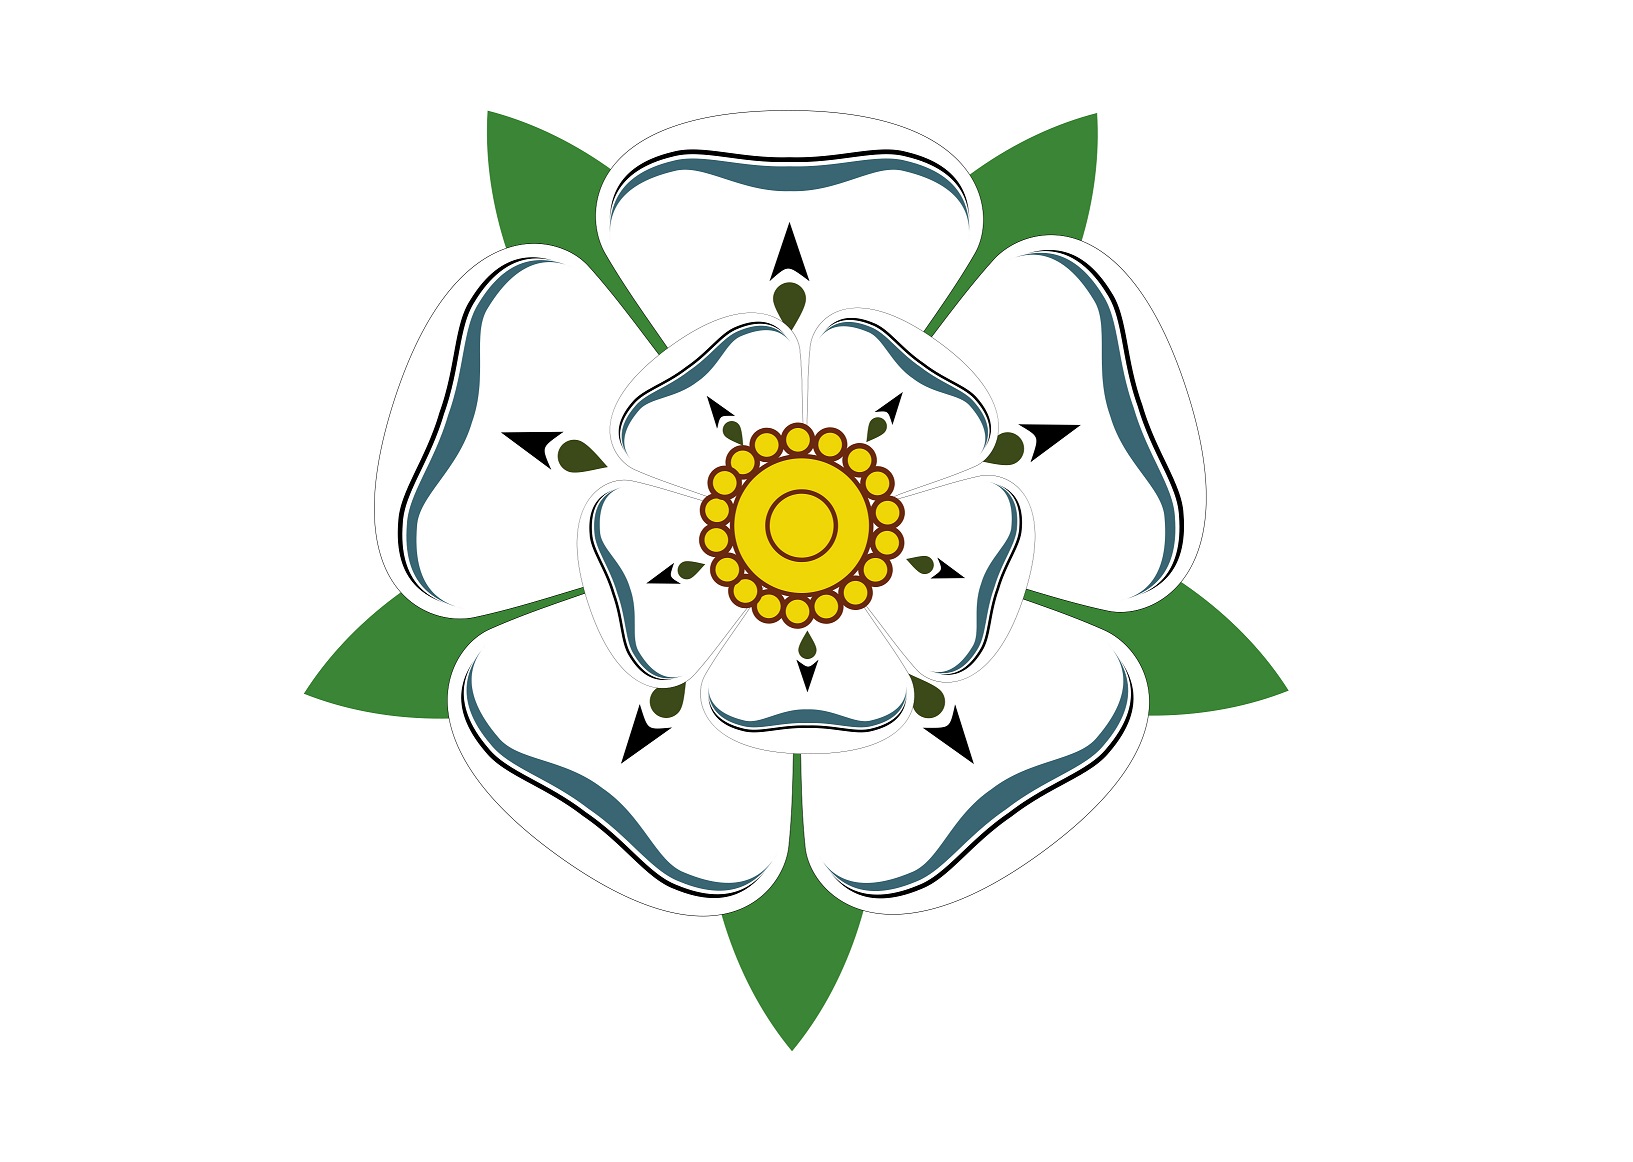 Yorkshire Day 